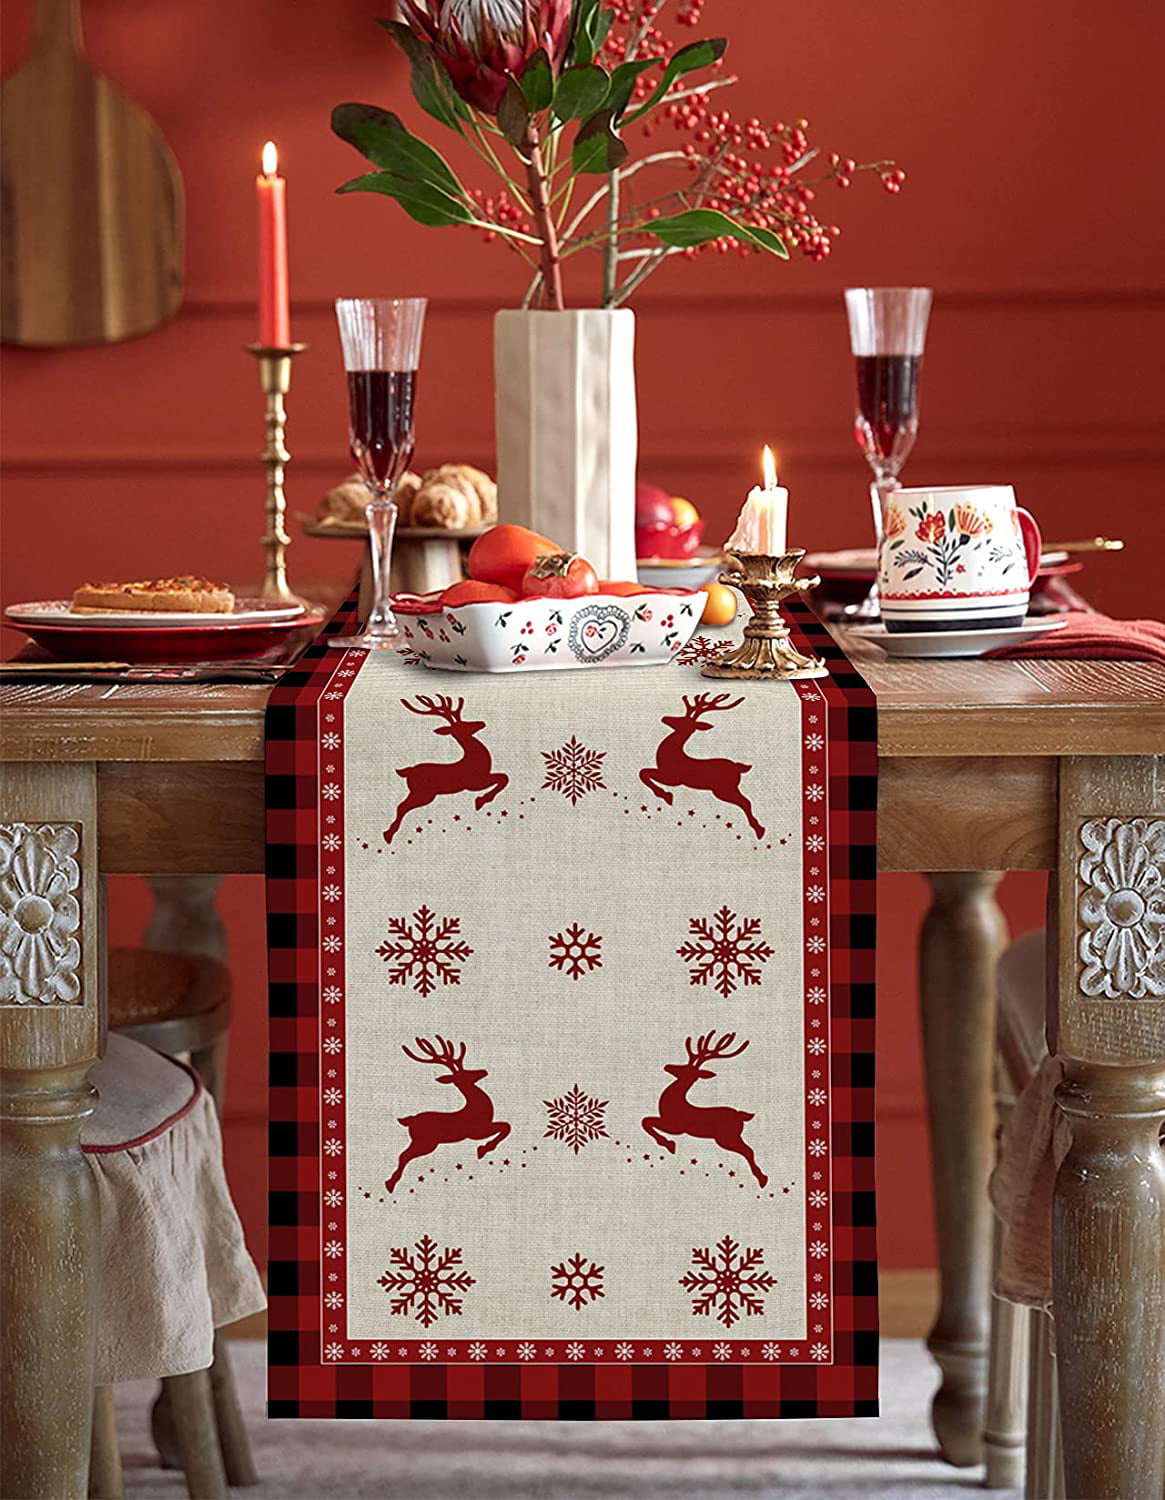  Table Runner Rustic Country Star Texas Dresser Scarves Runners  Red Berries Country Rustic Table Decor for Kitchen Dining Room Bedroom  Coffee Table 13x120 inches : Home & Kitchen